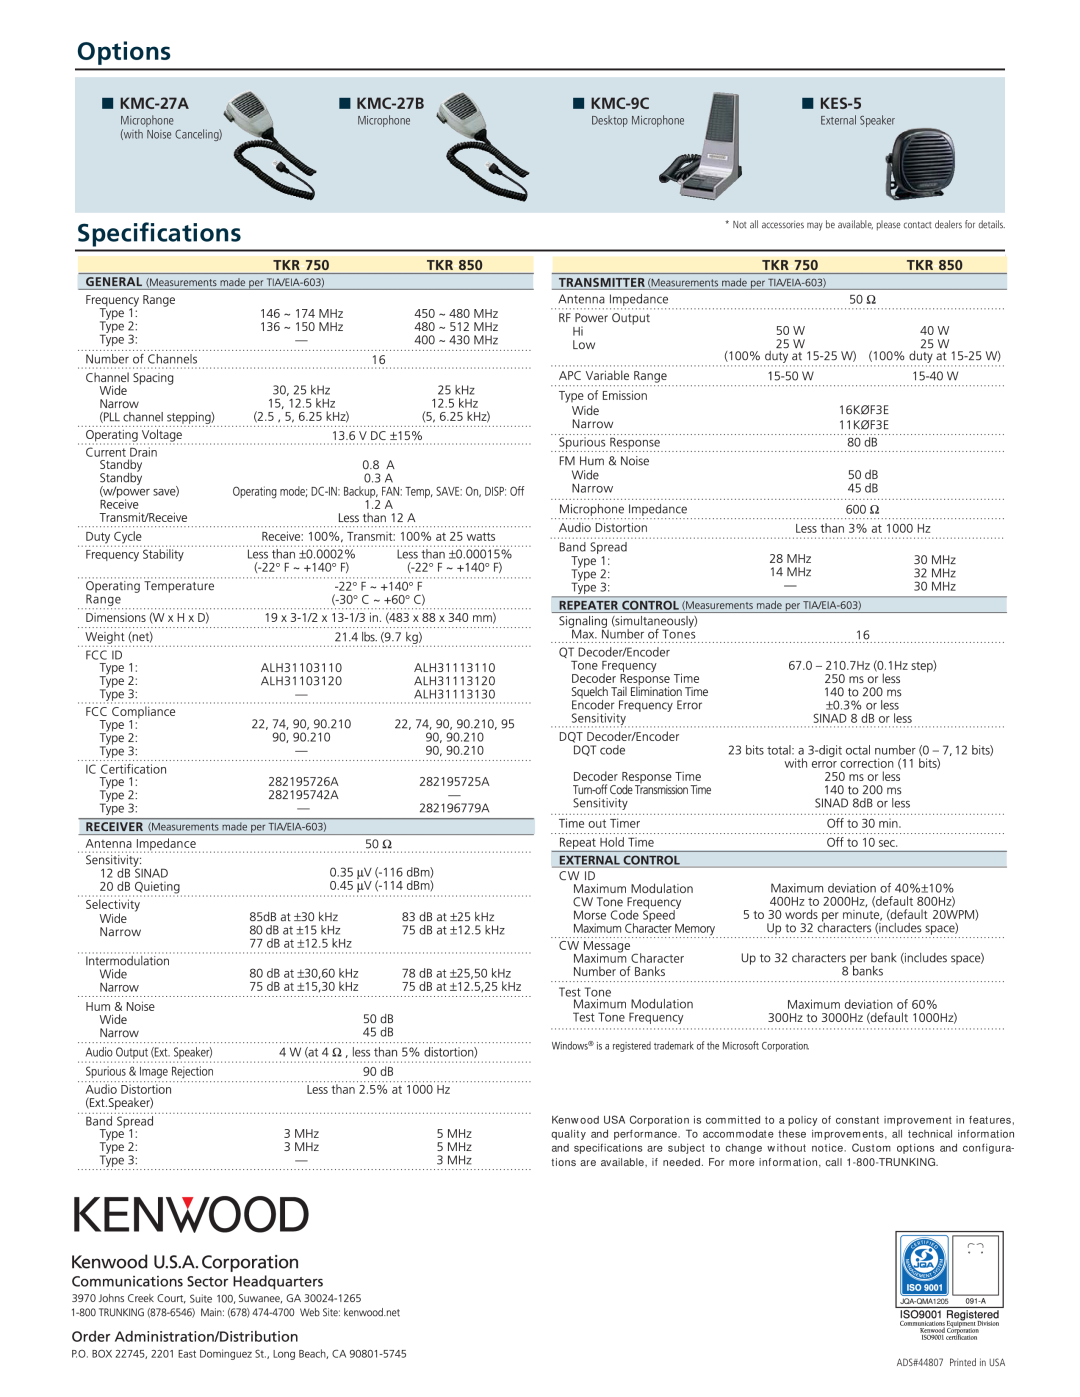 Kenwood TKR-750 manual Options, Specifications, KMC-27A, KMC-27B, KMC-9C, KES-5, Microphone, with Noise Canceling 